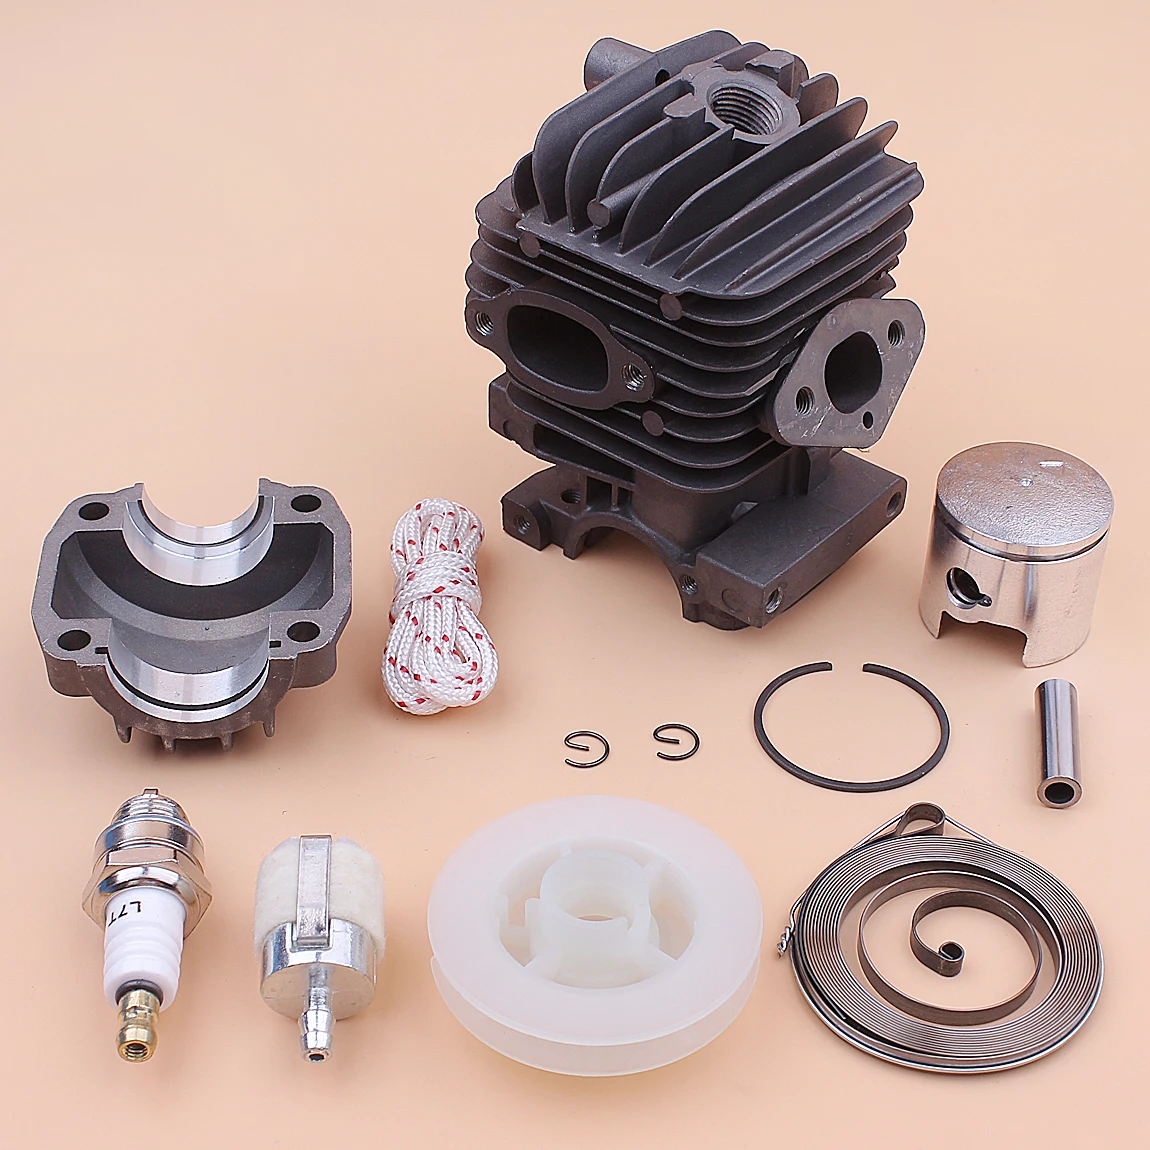 34mm Cylinder Piston Engine Pan Base Kit For Chinese 2500 25cc Recoil Starter Pulley Spring Rope Spark Plug Chainsaw Part images - 6